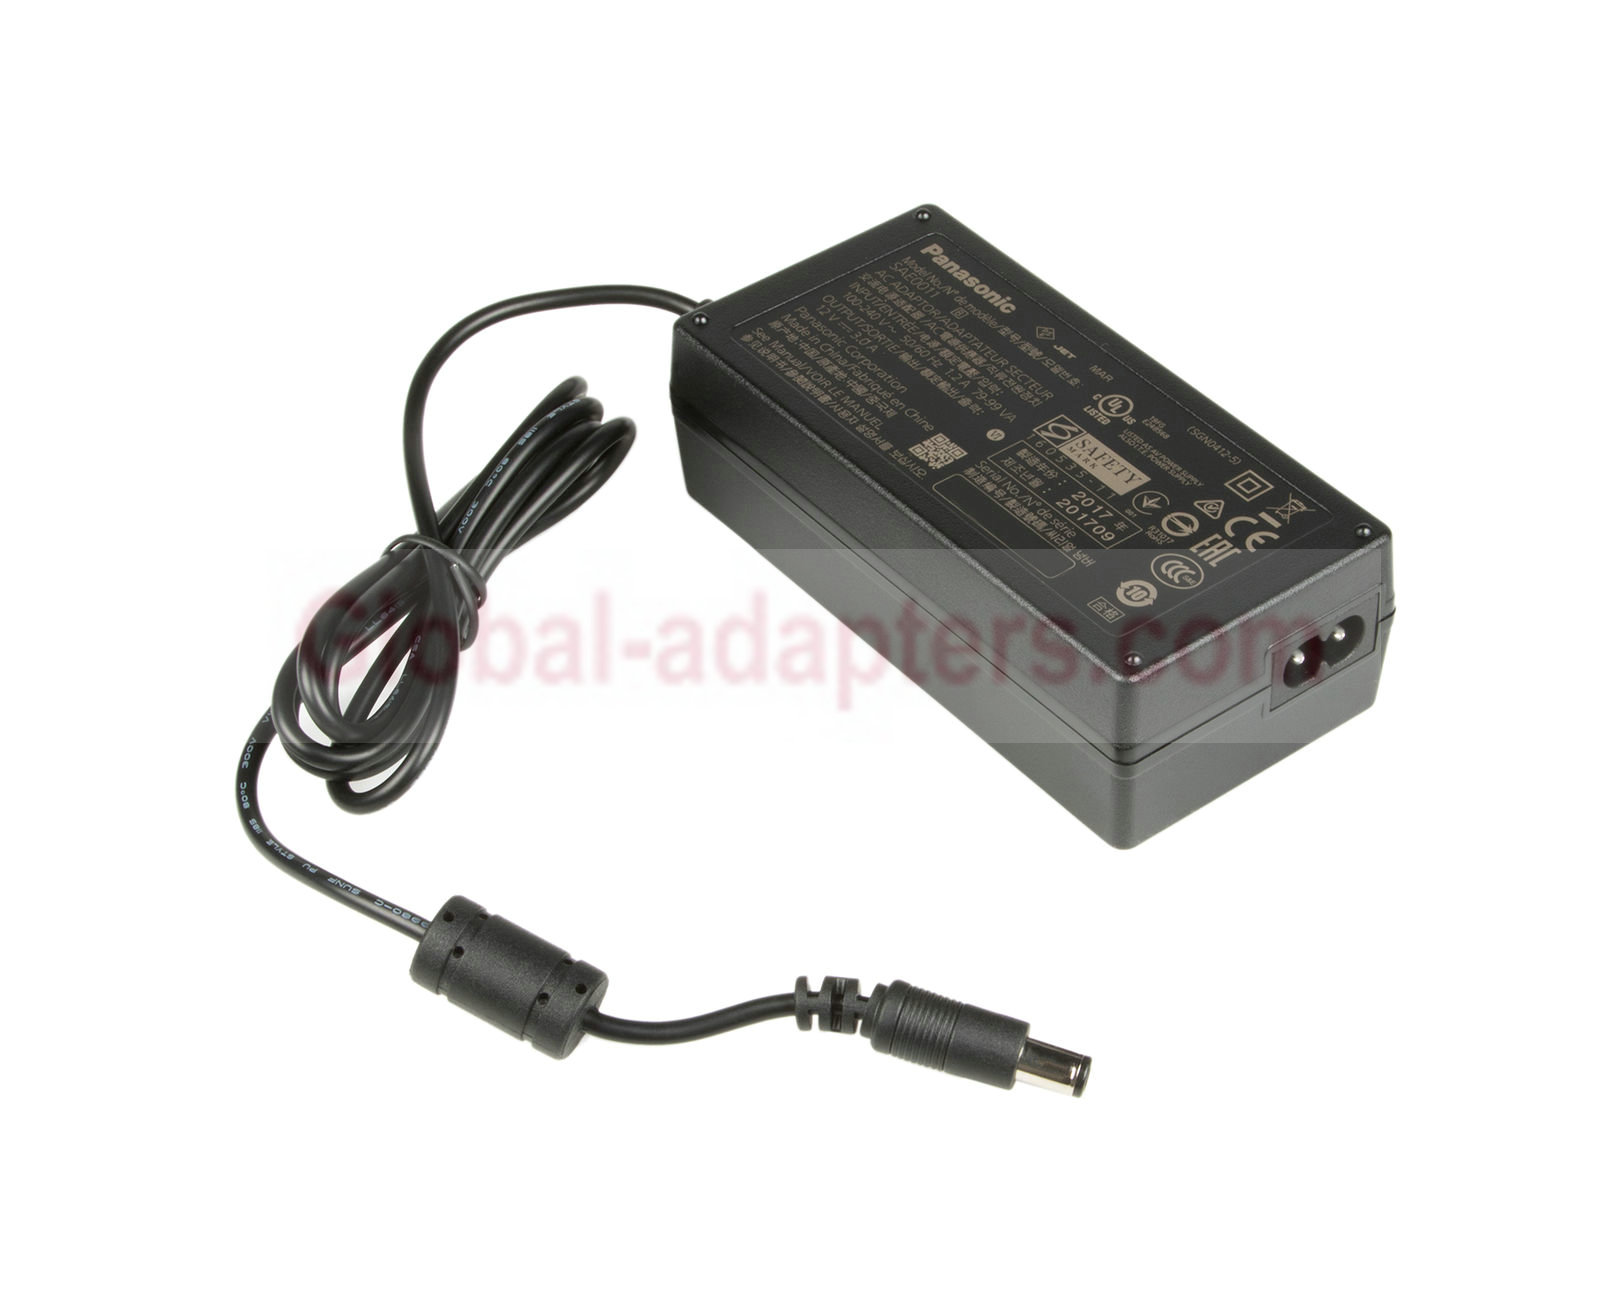 NEW 12V 3A Panasonic SAE0011BKT1 AC Adapter for Panasonic PT-DW830 AW-HE50 AW-HE120 - Click Image to Close